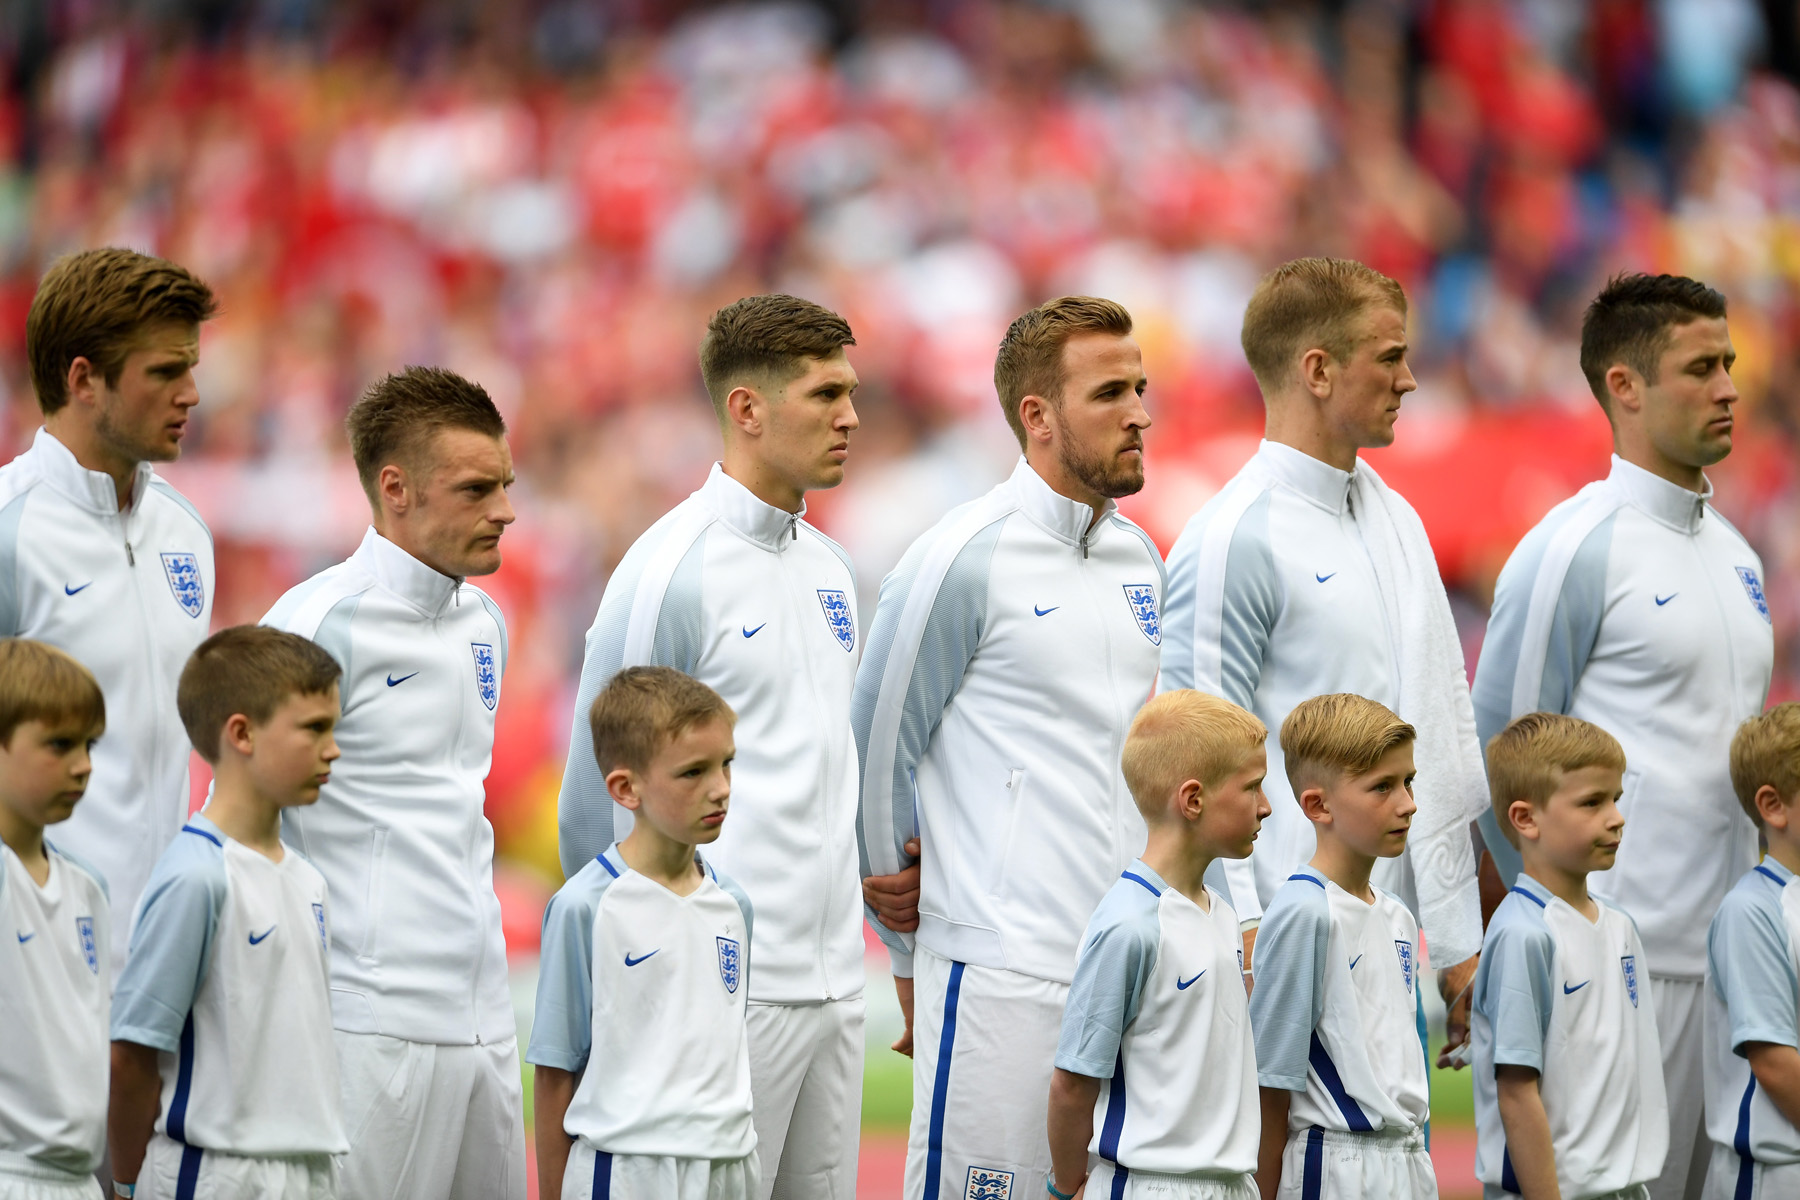 MANCHESTER, ENGLAND - MAY 22: (L-R) Eric Dier, Jamie Vardy, John Stones, Harry Kane, Joe Hart and Gary Cahill of England line up before the International Friendly match between England and Turkey at Etihad Stadium on May 22, 2016 in Manchester, England. (Photo by Laurence Griffiths/Getty Images)